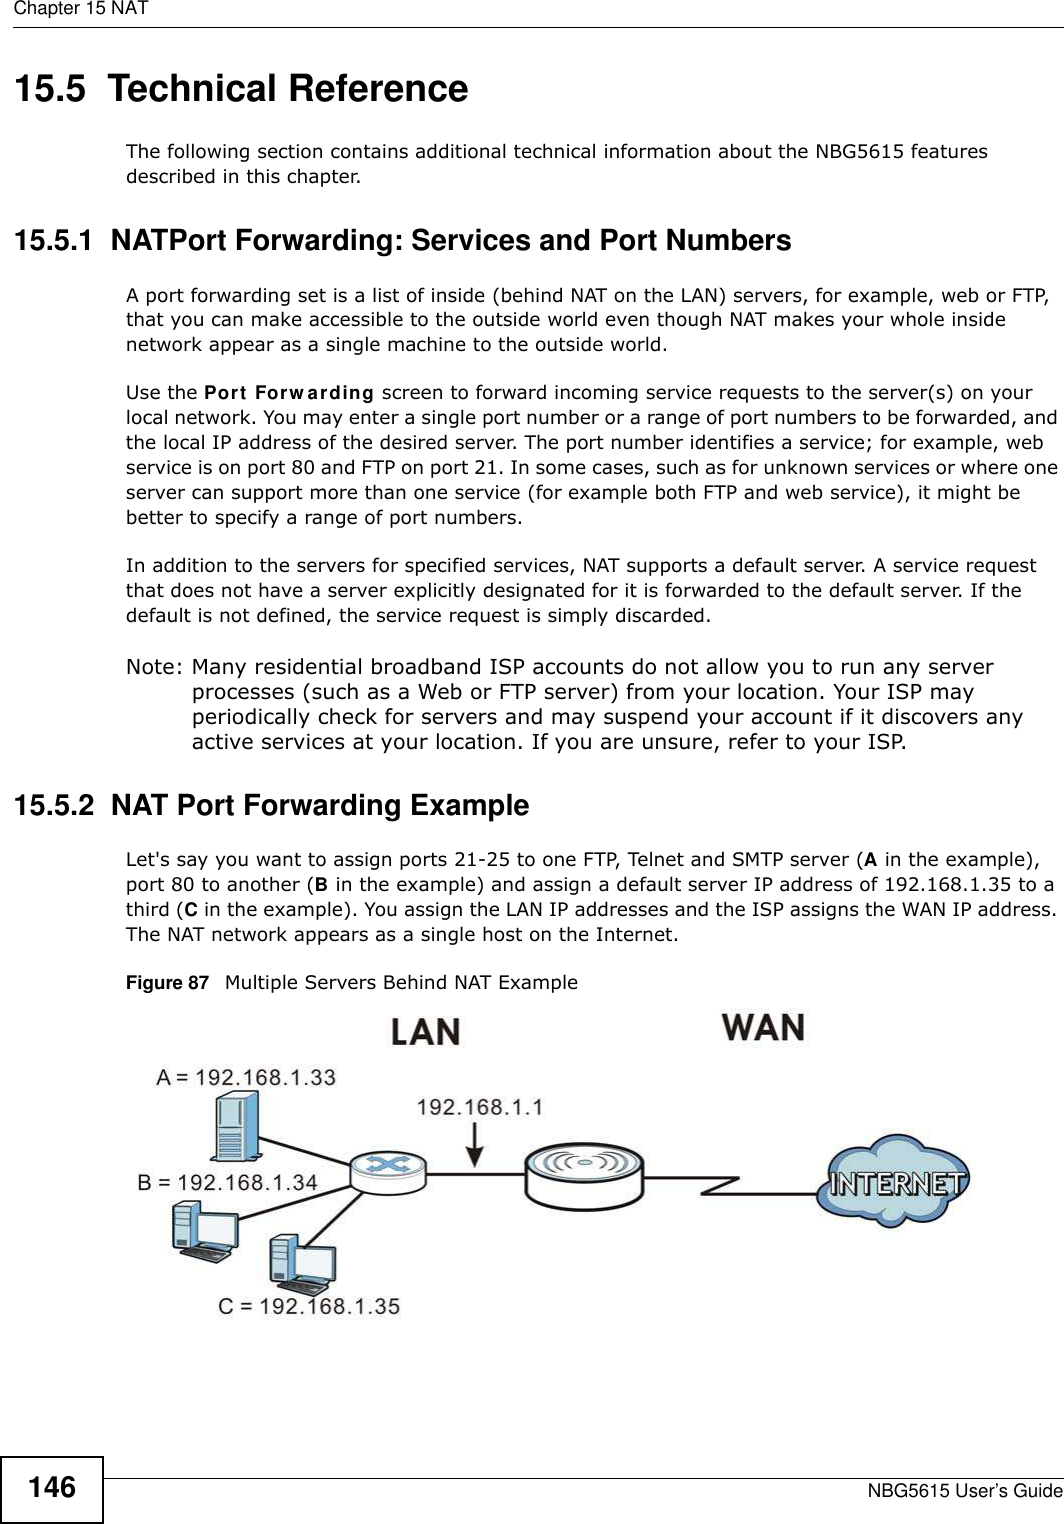 Chapter 15 NATNBG5615 User’s Guide14615.5  Technical ReferenceThe following section contains additional technical information about the NBG5615 features described in this chapter.15.5.1  NATPort Forwarding: Services and Port NumbersA port forwarding set is a list of inside (behind NAT on the LAN) servers, for example, web or FTP, that you can make accessible to the outside world even though NAT makes your whole inside network appear as a single machine to the outside world. Use the Port Forw arding screen to forward incoming service requests to the server(s) on your local network. You may enter a single port number or a range of port numbers to be forwarded, and the local IP address of the desired server. The port number identifies a service; for example, web service is on port 80 and FTP on port 21. In some cases, such as for unknown services or where one server can support more than one service (for example both FTP and web service), it might be better to specify a range of port numbers.In addition to the servers for specified services, NAT supports a default server. A service request that does not have a server explicitly designated for it is forwarded to the default server. If the default is not defined, the service request is simply discarded.Note: Many residential broadband ISP accounts do not allow you to run any server processes (such as a Web or FTP server) from your location. Your ISP may periodically check for servers and may suspend your account if it discovers any active services at your location. If you are unsure, refer to your ISP.15.5.2  NAT Port Forwarding ExampleLet&apos;s say you want to assign ports 21-25 to one FTP, Telnet and SMTP server (A in the example), port 80 to another (B in the example) and assign a default server IP address of 192.168.1.35 to a third (C in the example). You assign the LAN IP addresses and the ISP assigns the WAN IP address. The NAT network appears as a single host on the Internet.Figure 87   Multiple Servers Behind NAT Example